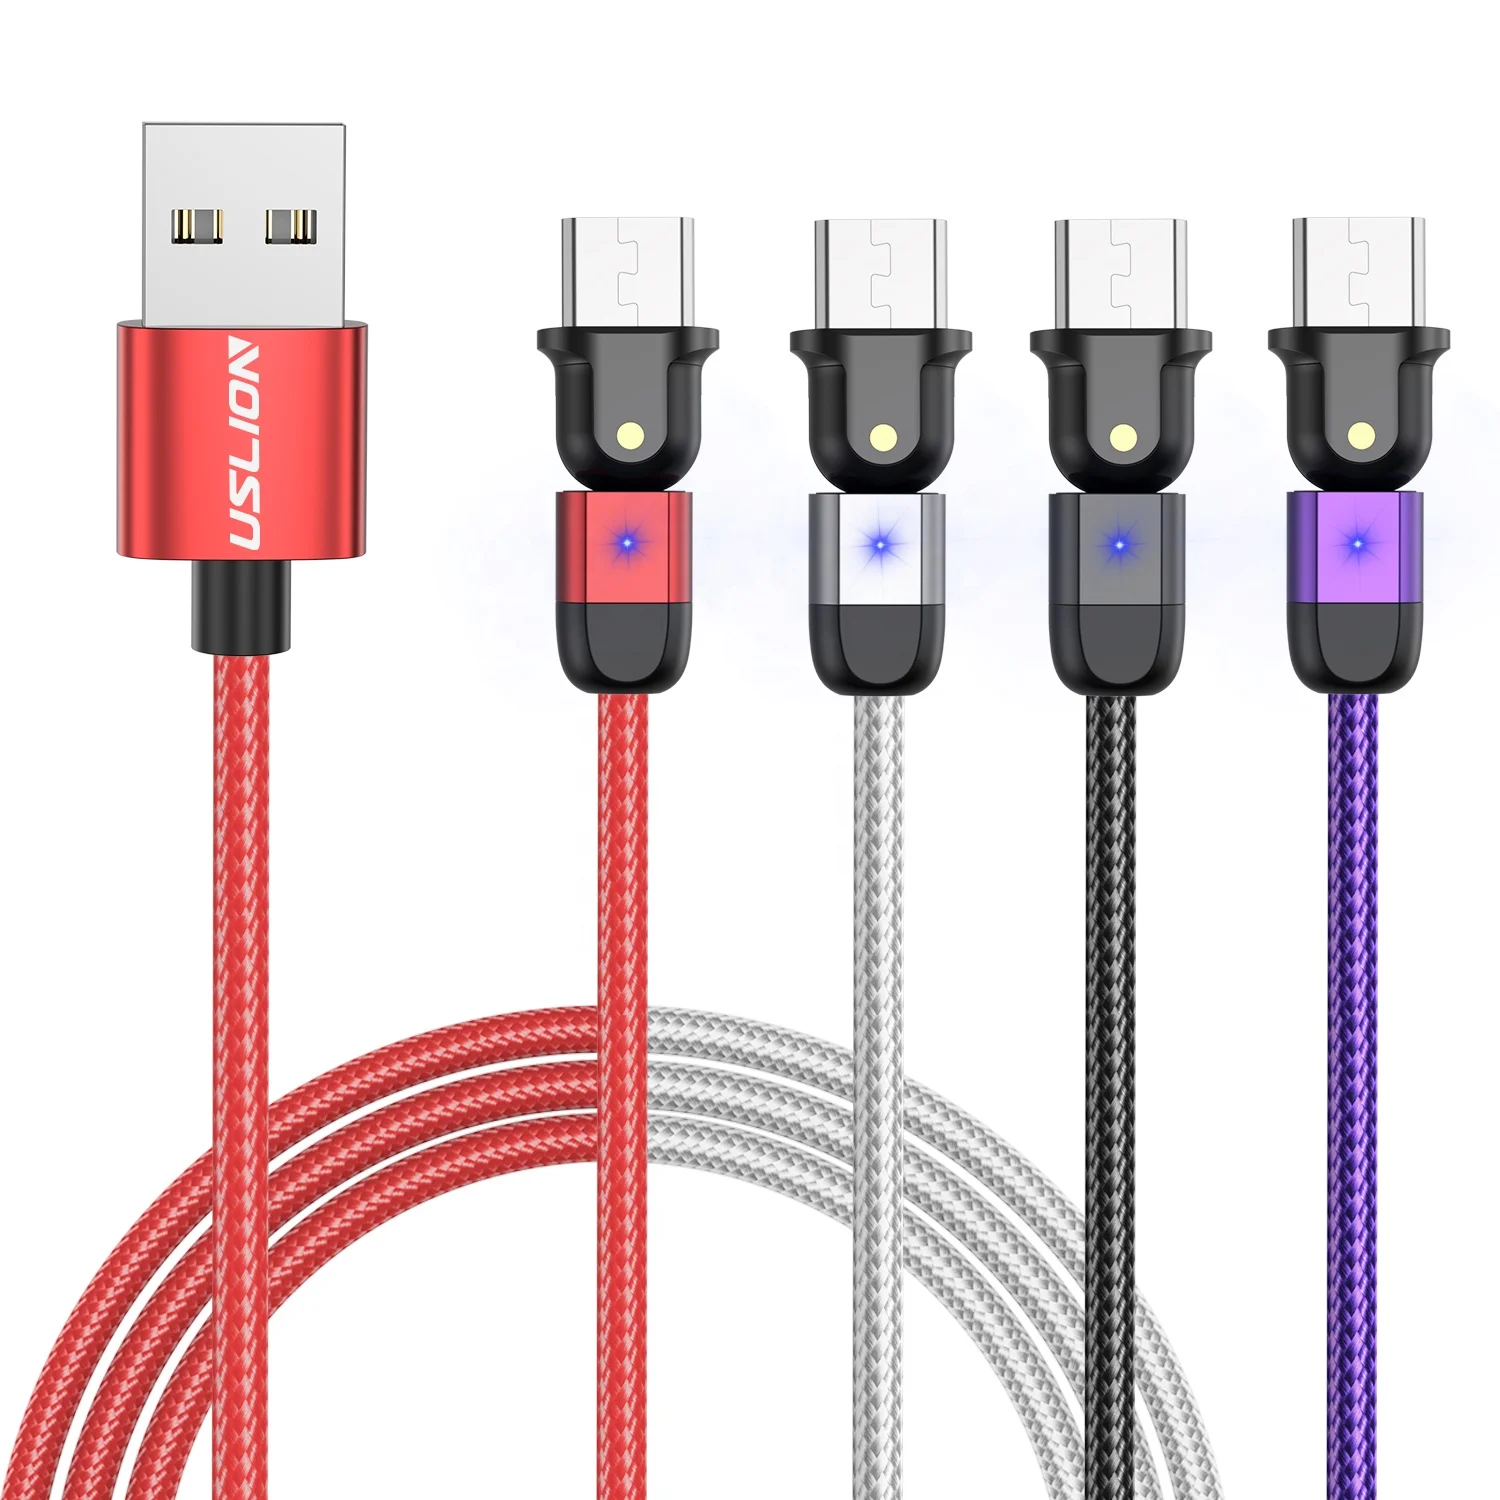 

USLION 0.5M 1M 2MFast charging cable usb 180 degree rotation phone charger 3A fast charge cable with data transfer, Black/red/silver/purple